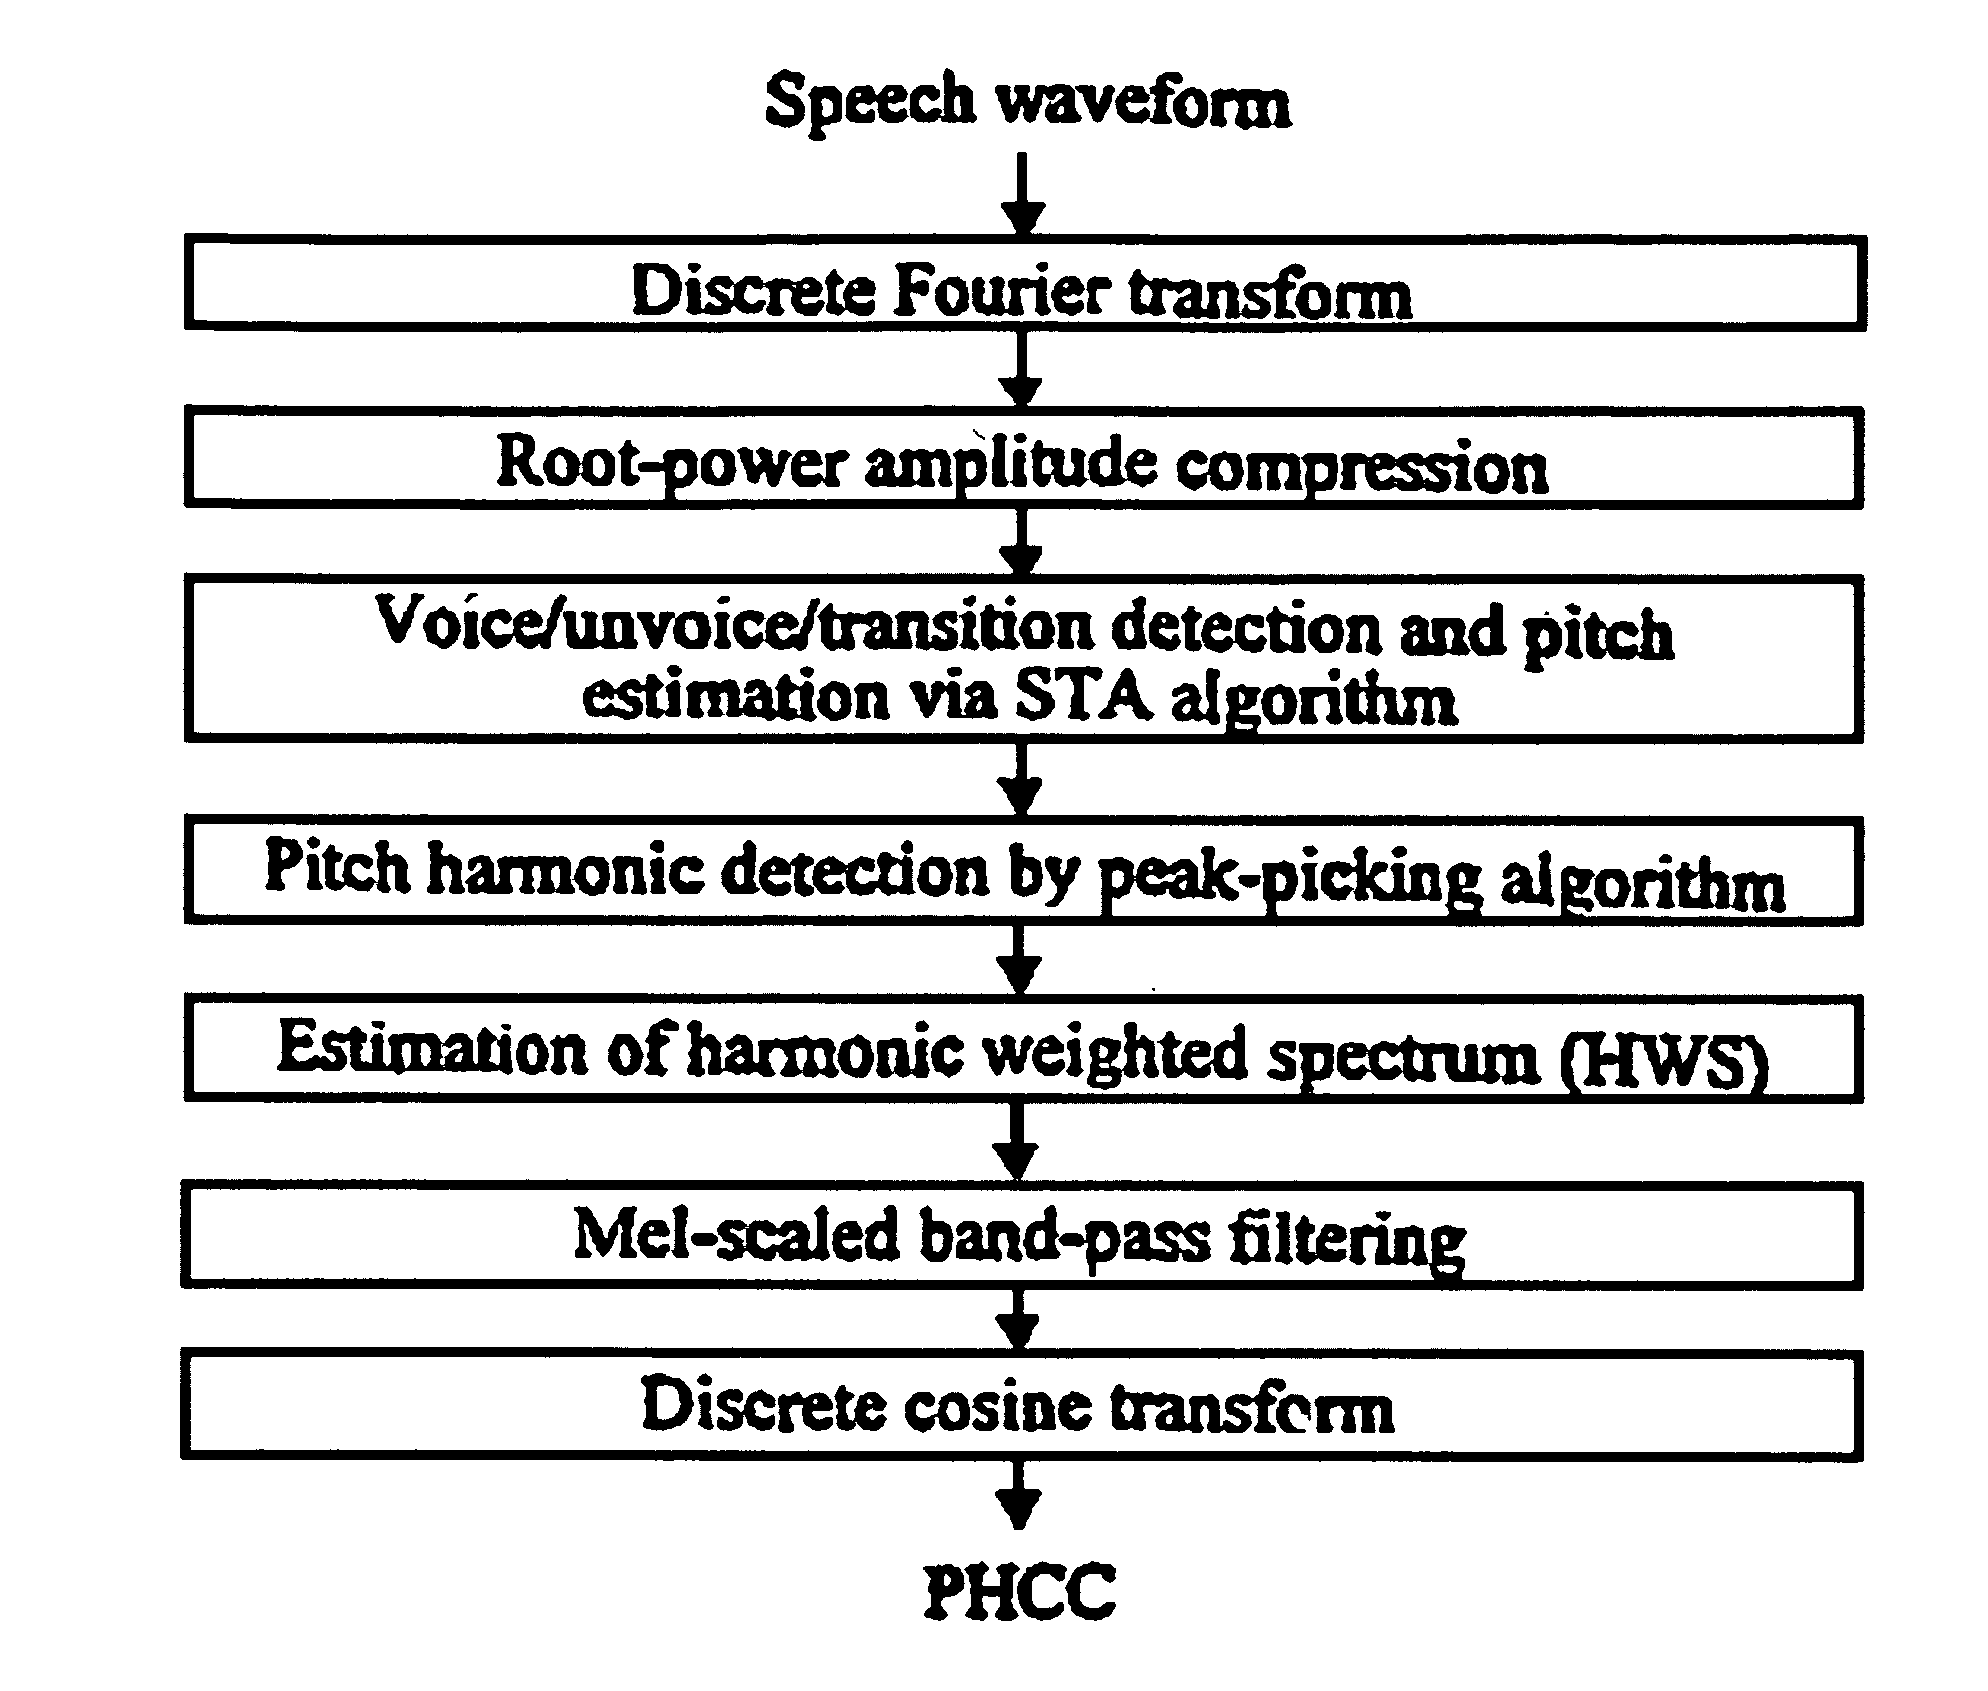 Perceptual harmonic cepstral coefficients as the front-end for speech recognition